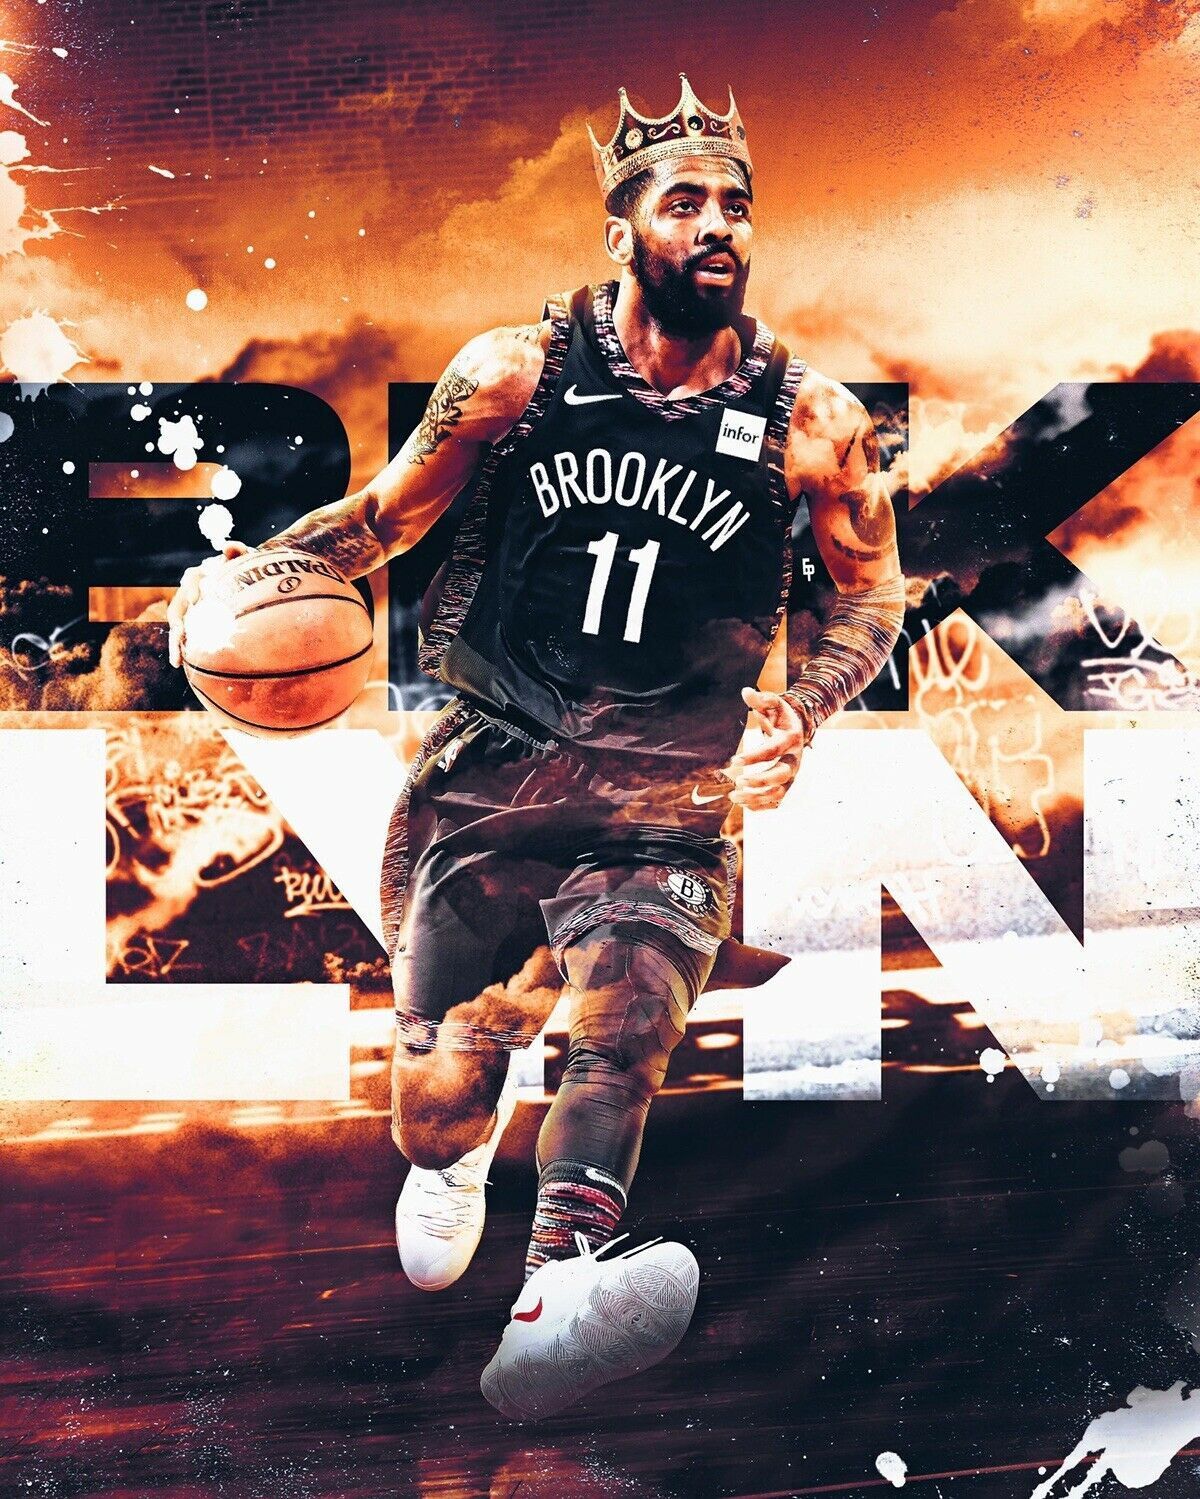 KYRIE IRVING ARTWORK POSTER Nba Irving vintage poster Canvas Brooklyn Nets - $6.99. FRAMES ITS ONLY FOR EXAMPLE! YO. Kyrie irving, Nba picture, Irving wallpaper